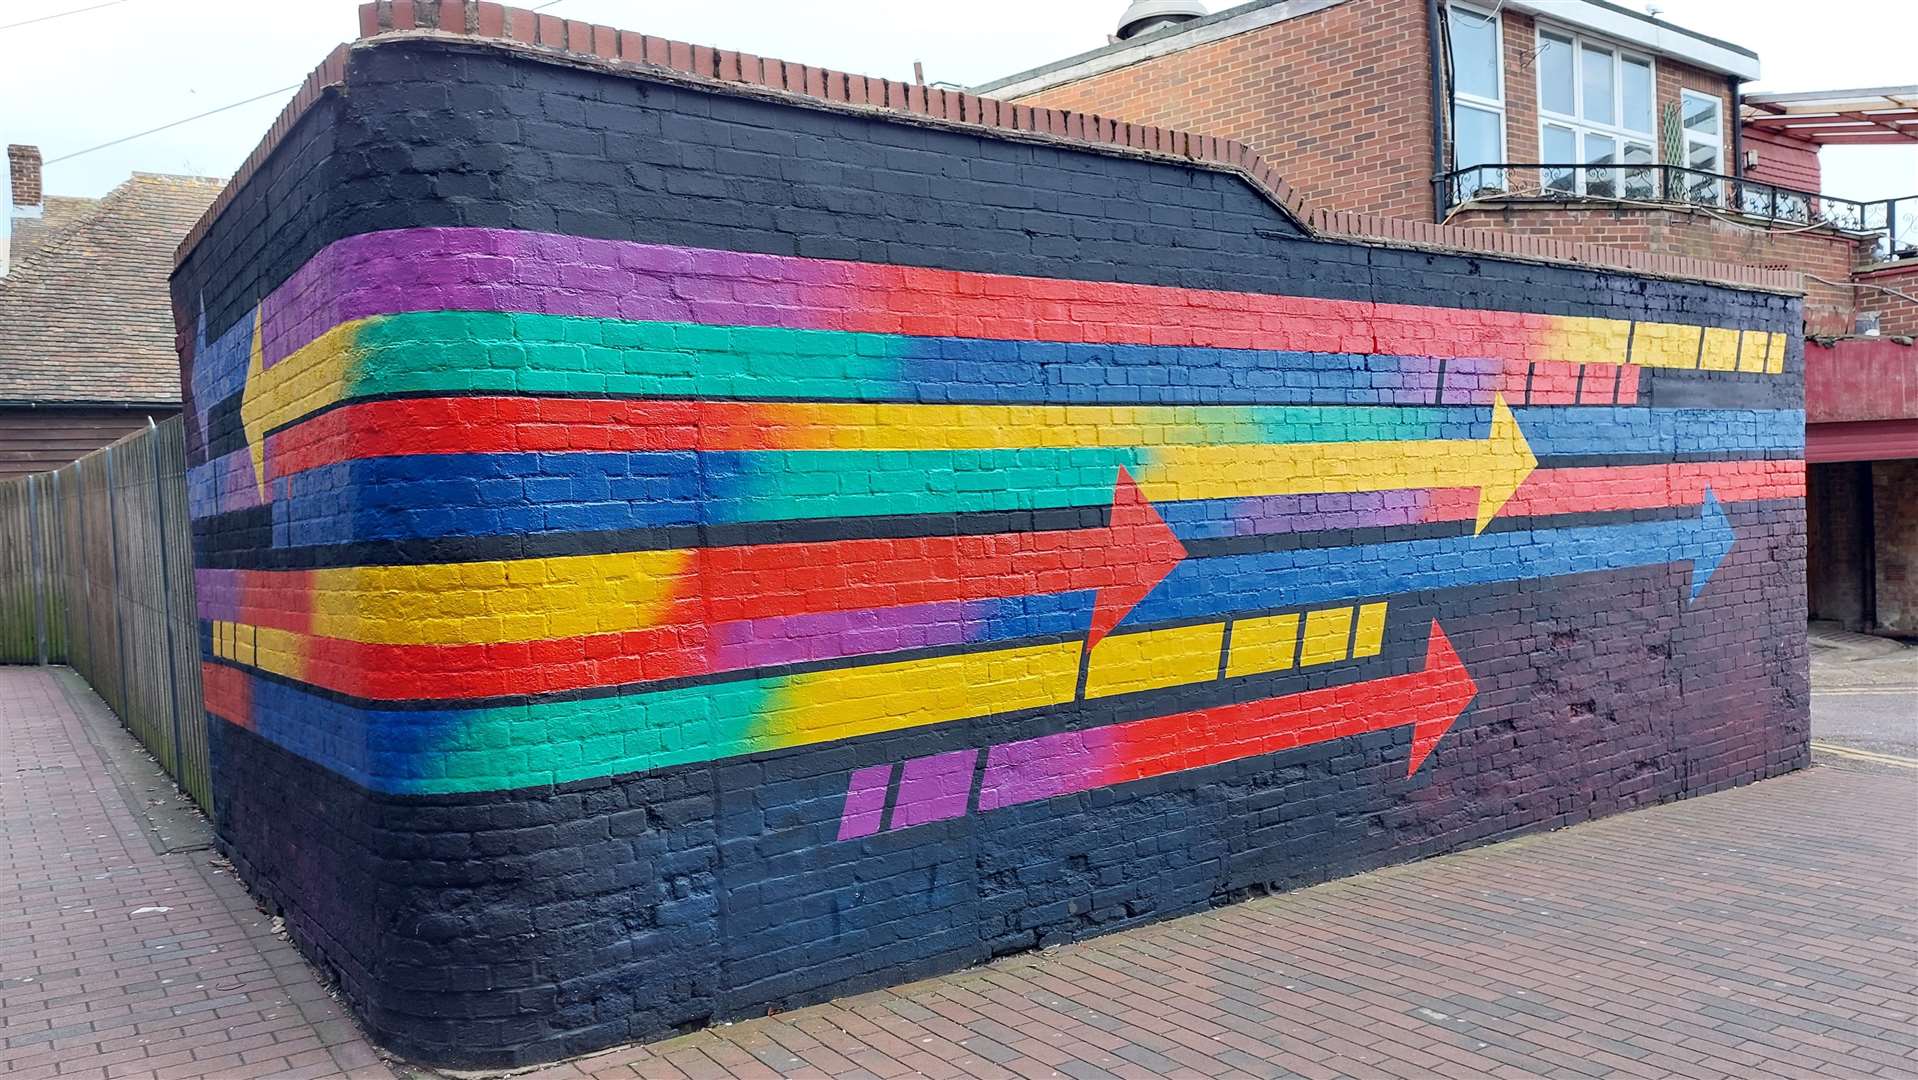 A mural by Charley Peters shows a collection of colourful arrows